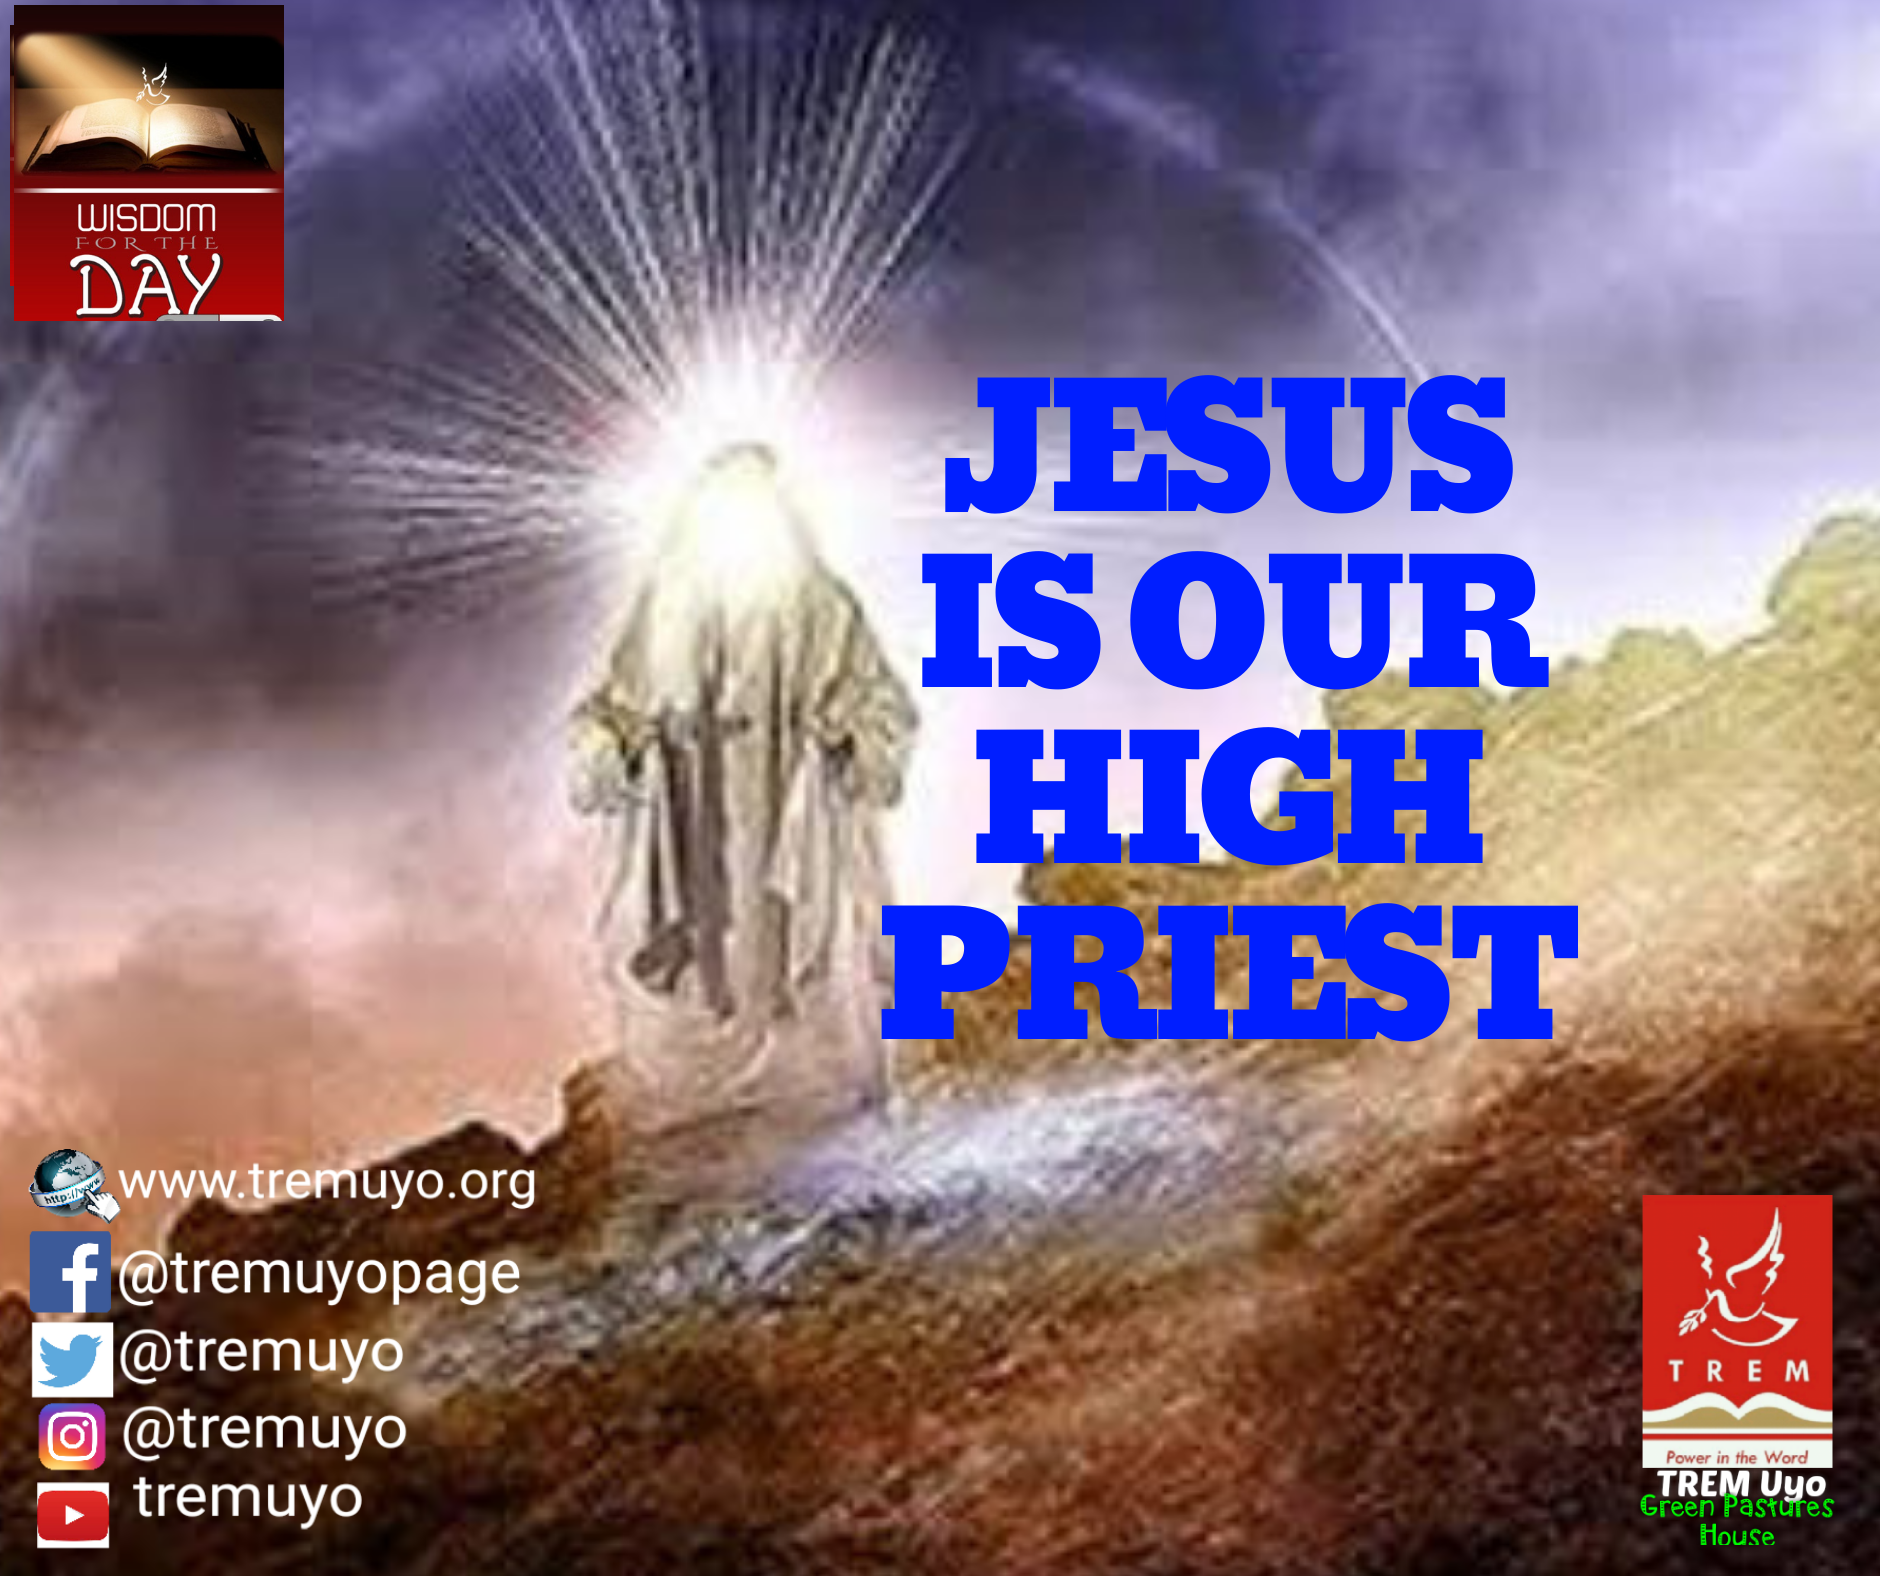 JESUS IS OUR HIGH PRIEST